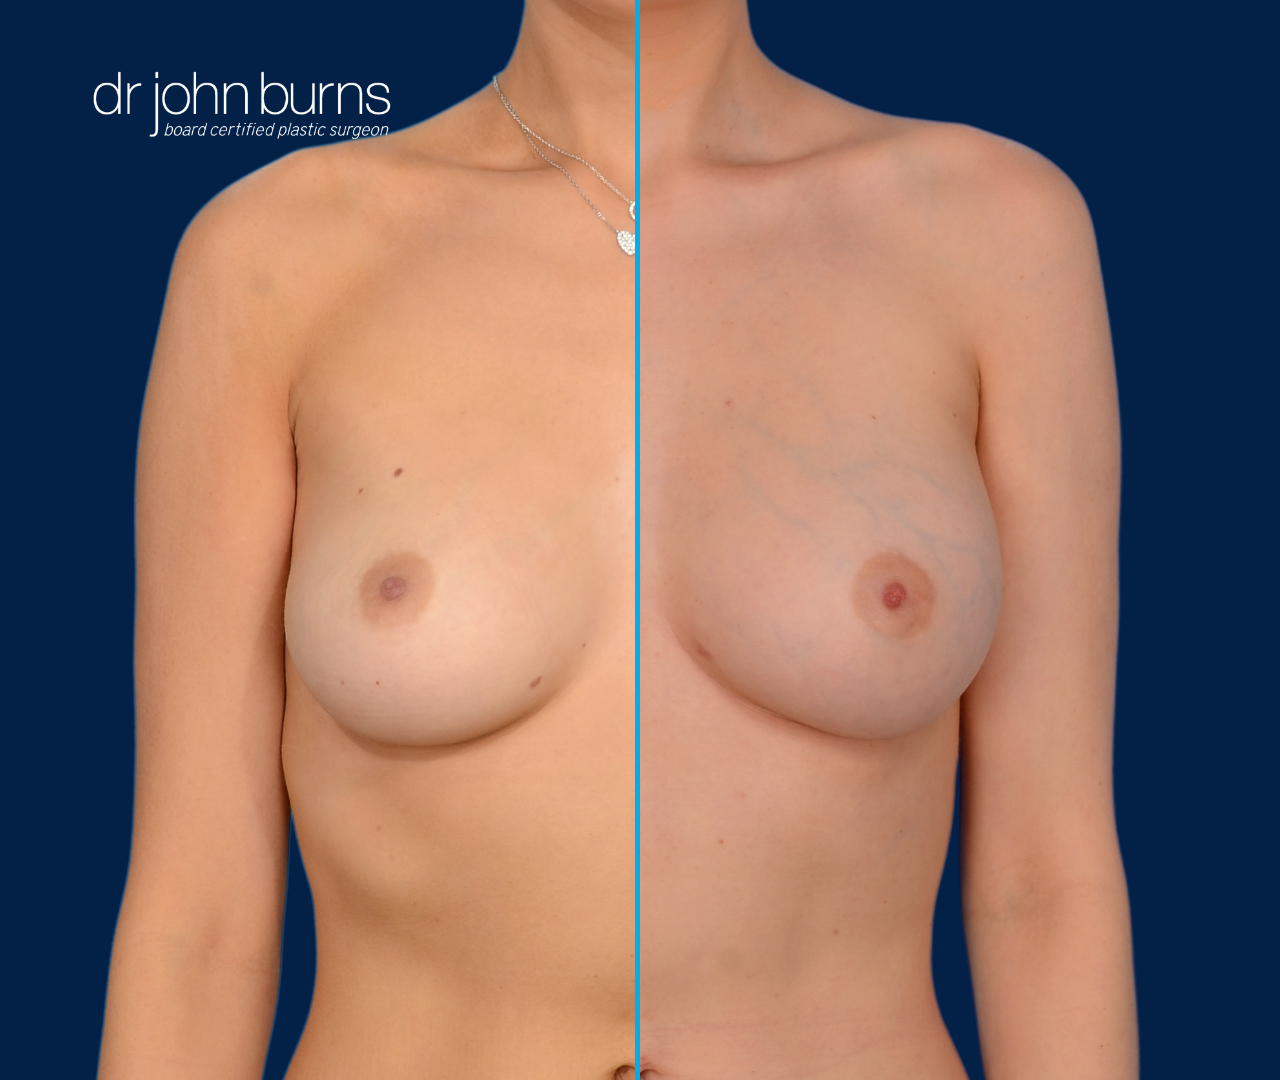 case 14- split screen before & after fat transfer to breast by top plastic surgeon, Dr. John Burns